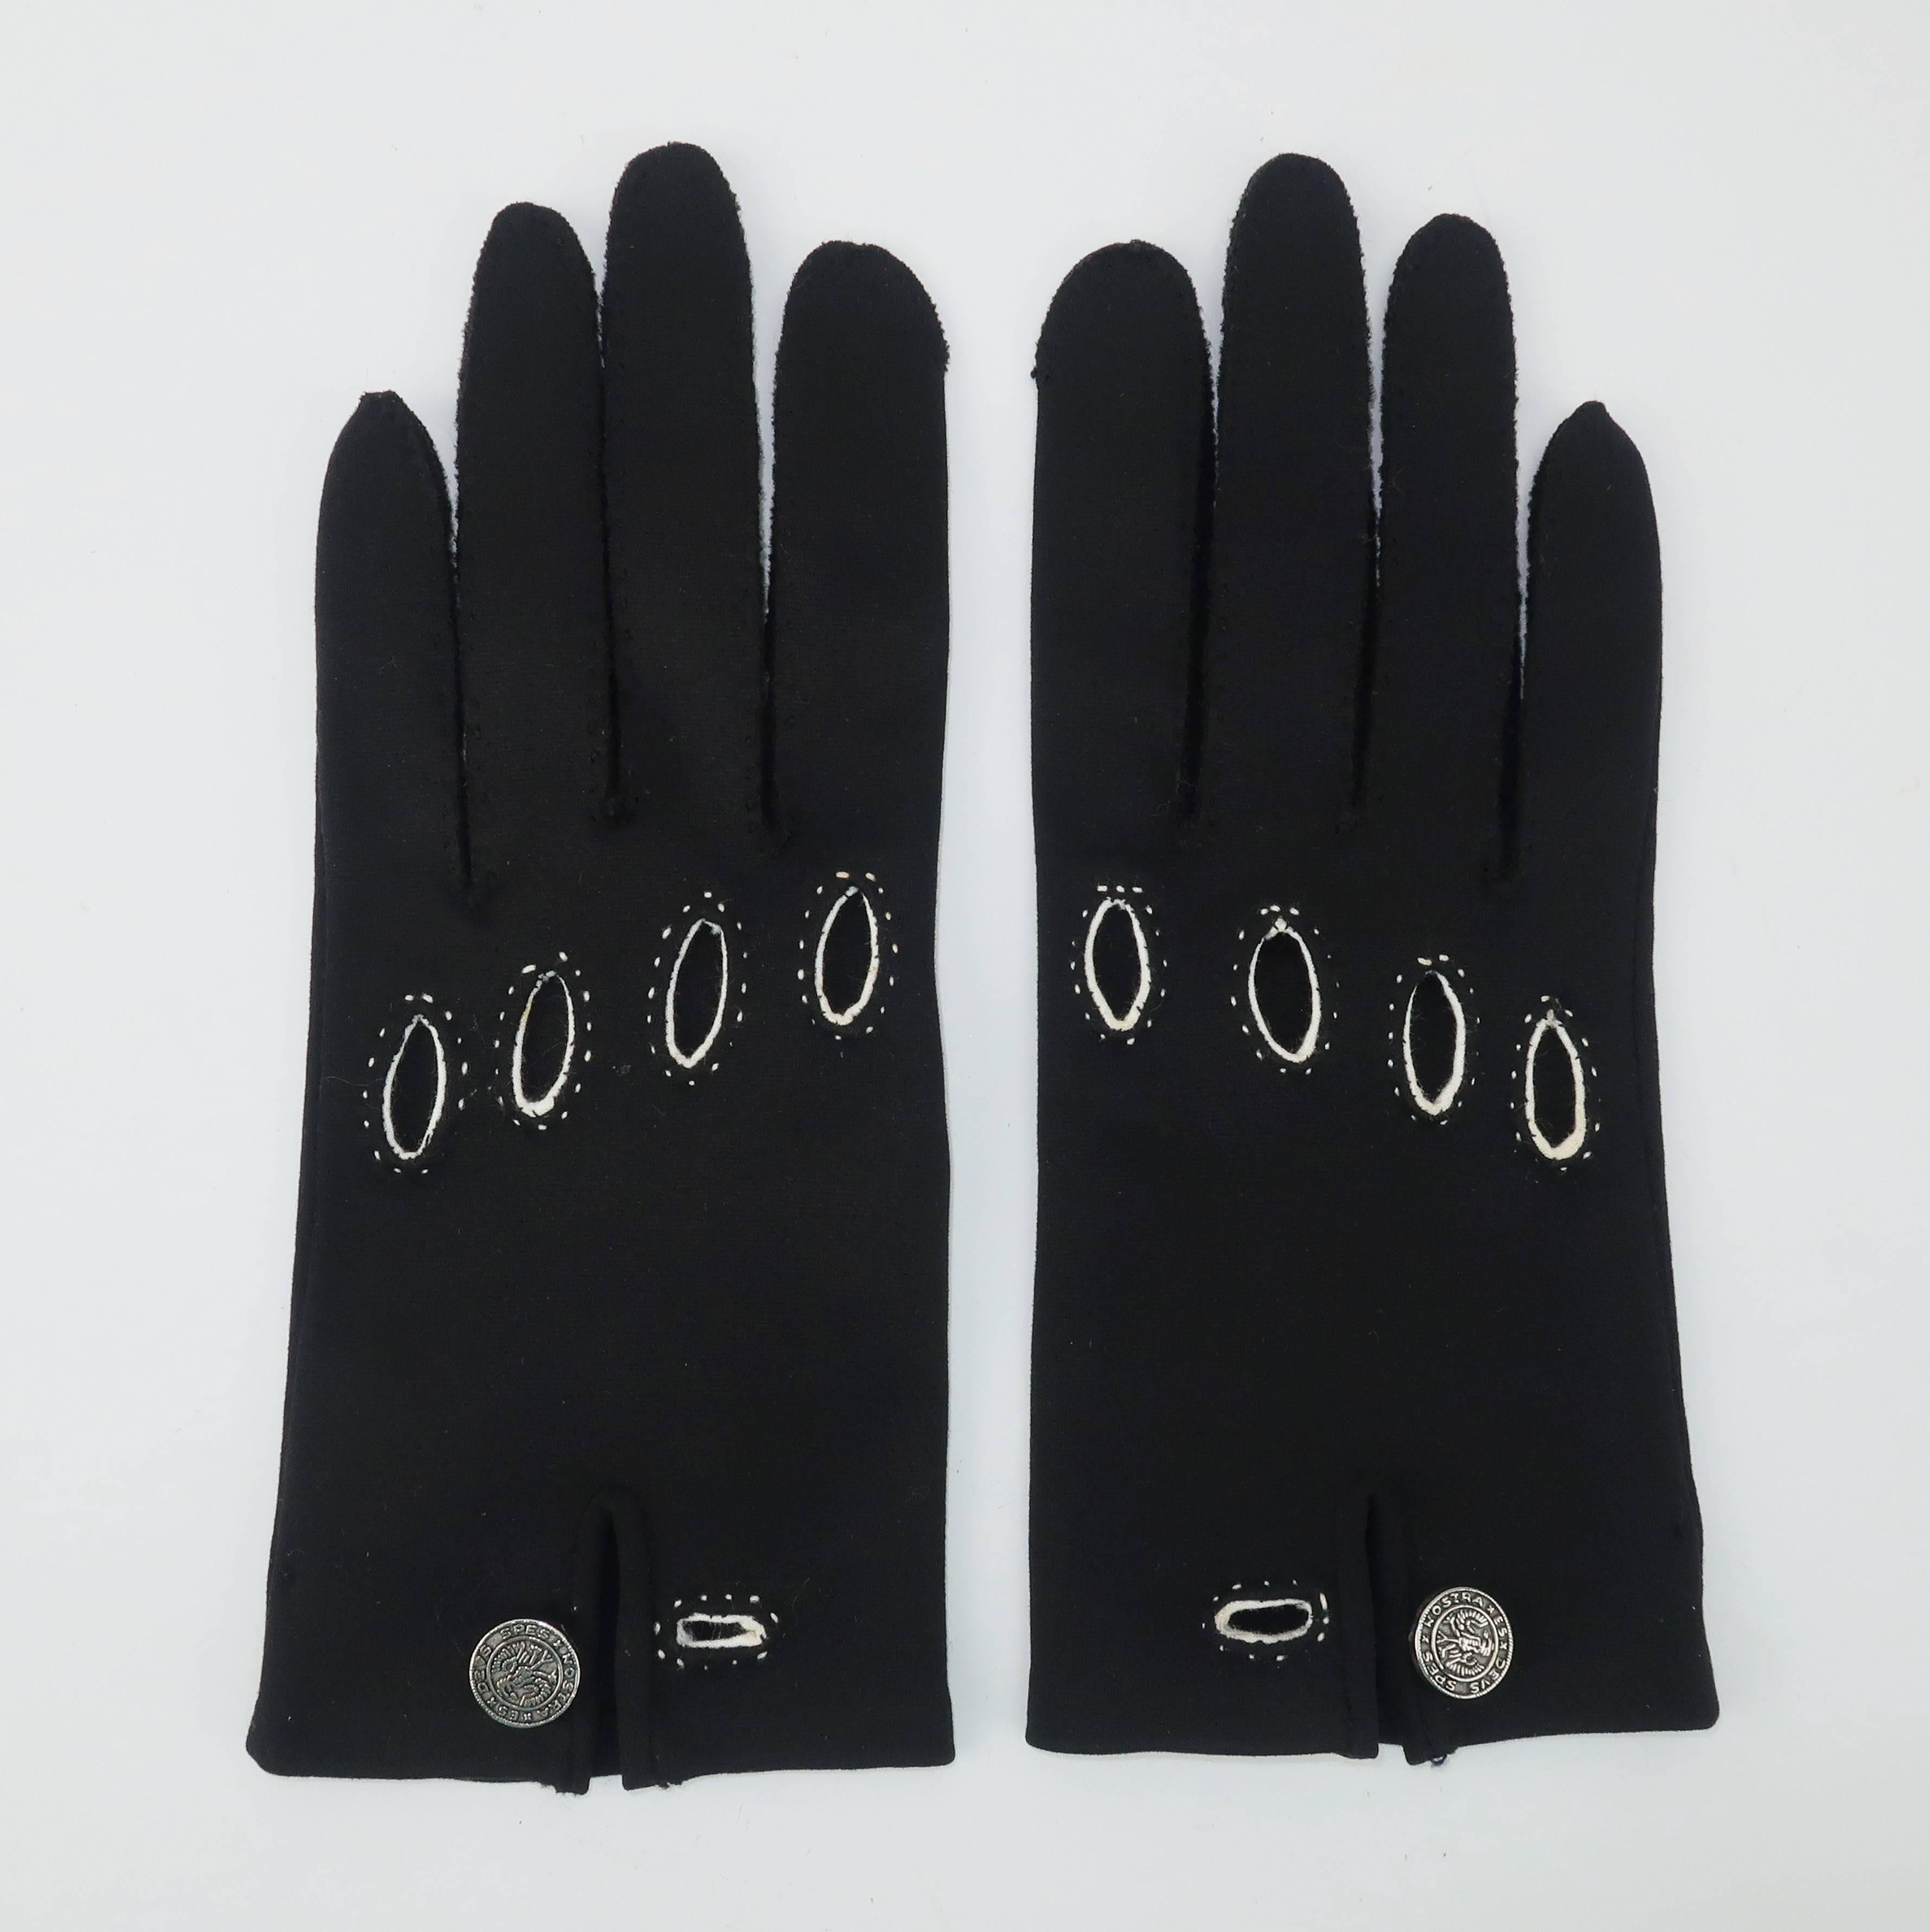 These Saks Fifth Avenue gloves are a fashionable fix to the classic driving glove.  The black polished cotton body is accented with bright white stitching at the cut outs and wrist.  A silver metal button decorates the wrist with the slogan 'Spes